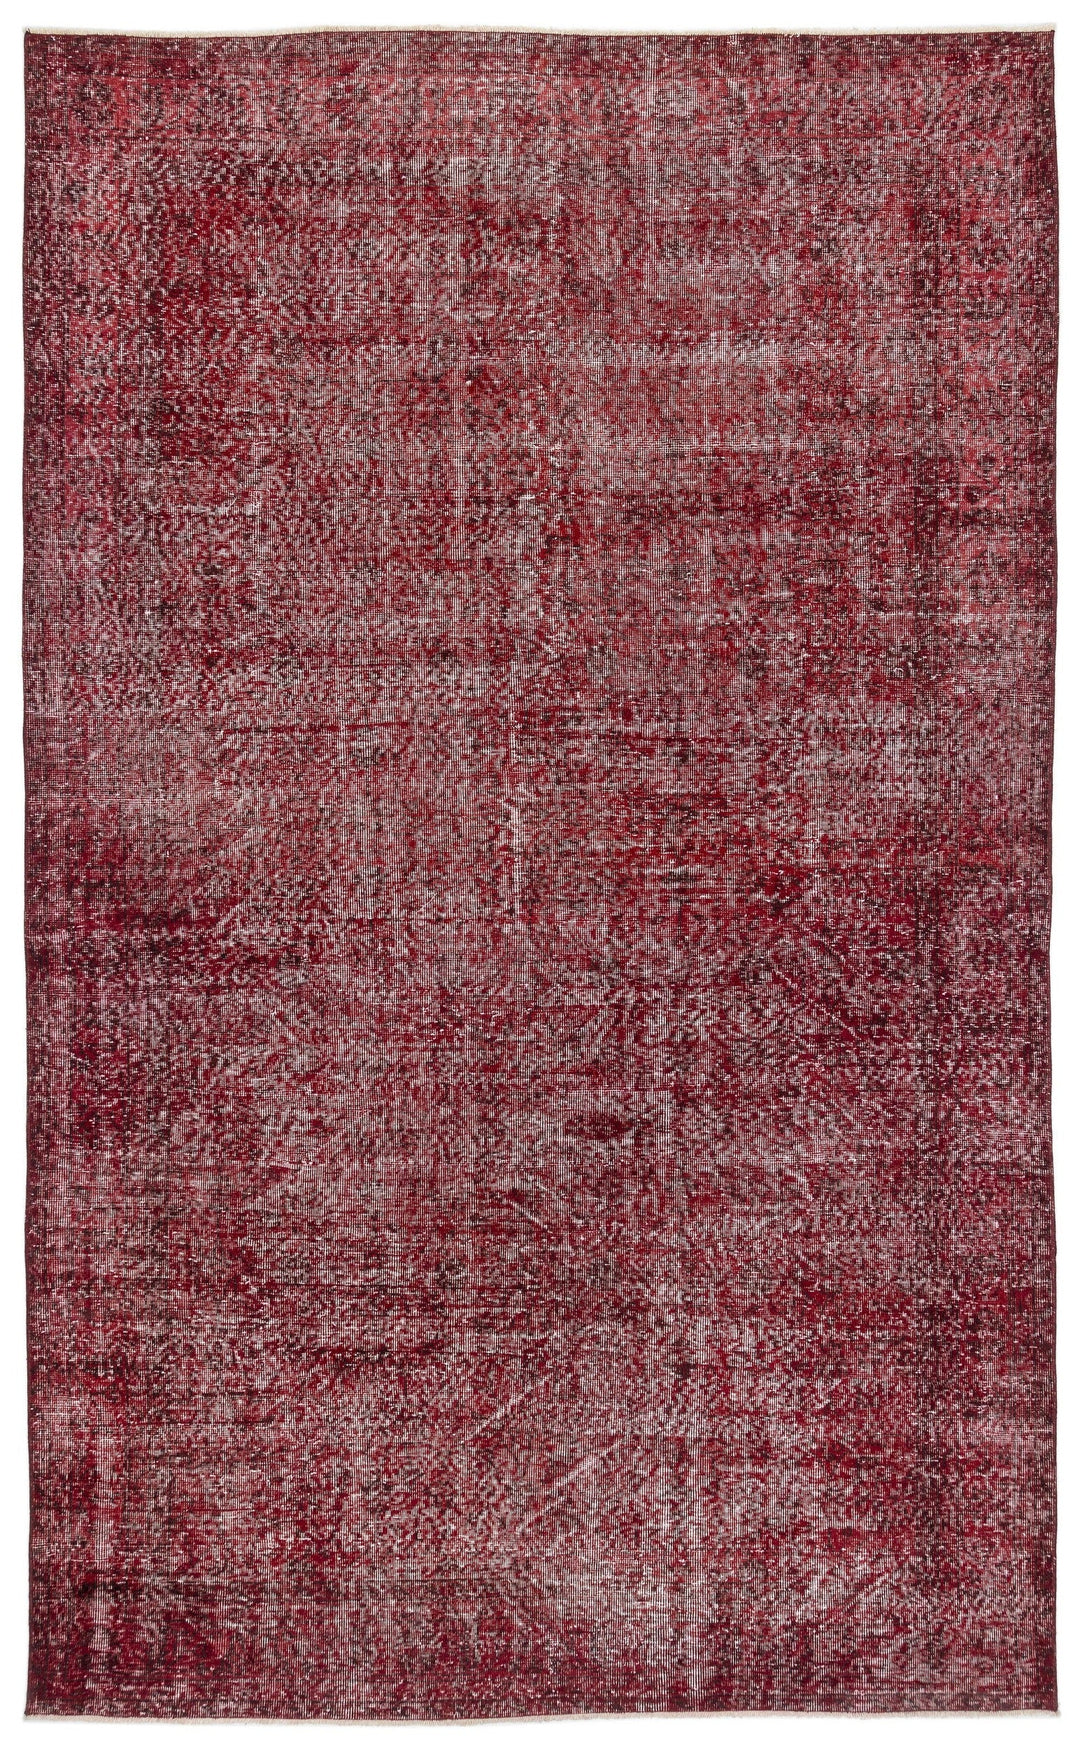 Athens Red Tumbled Wool Hand Woven Carpet 196 x 320